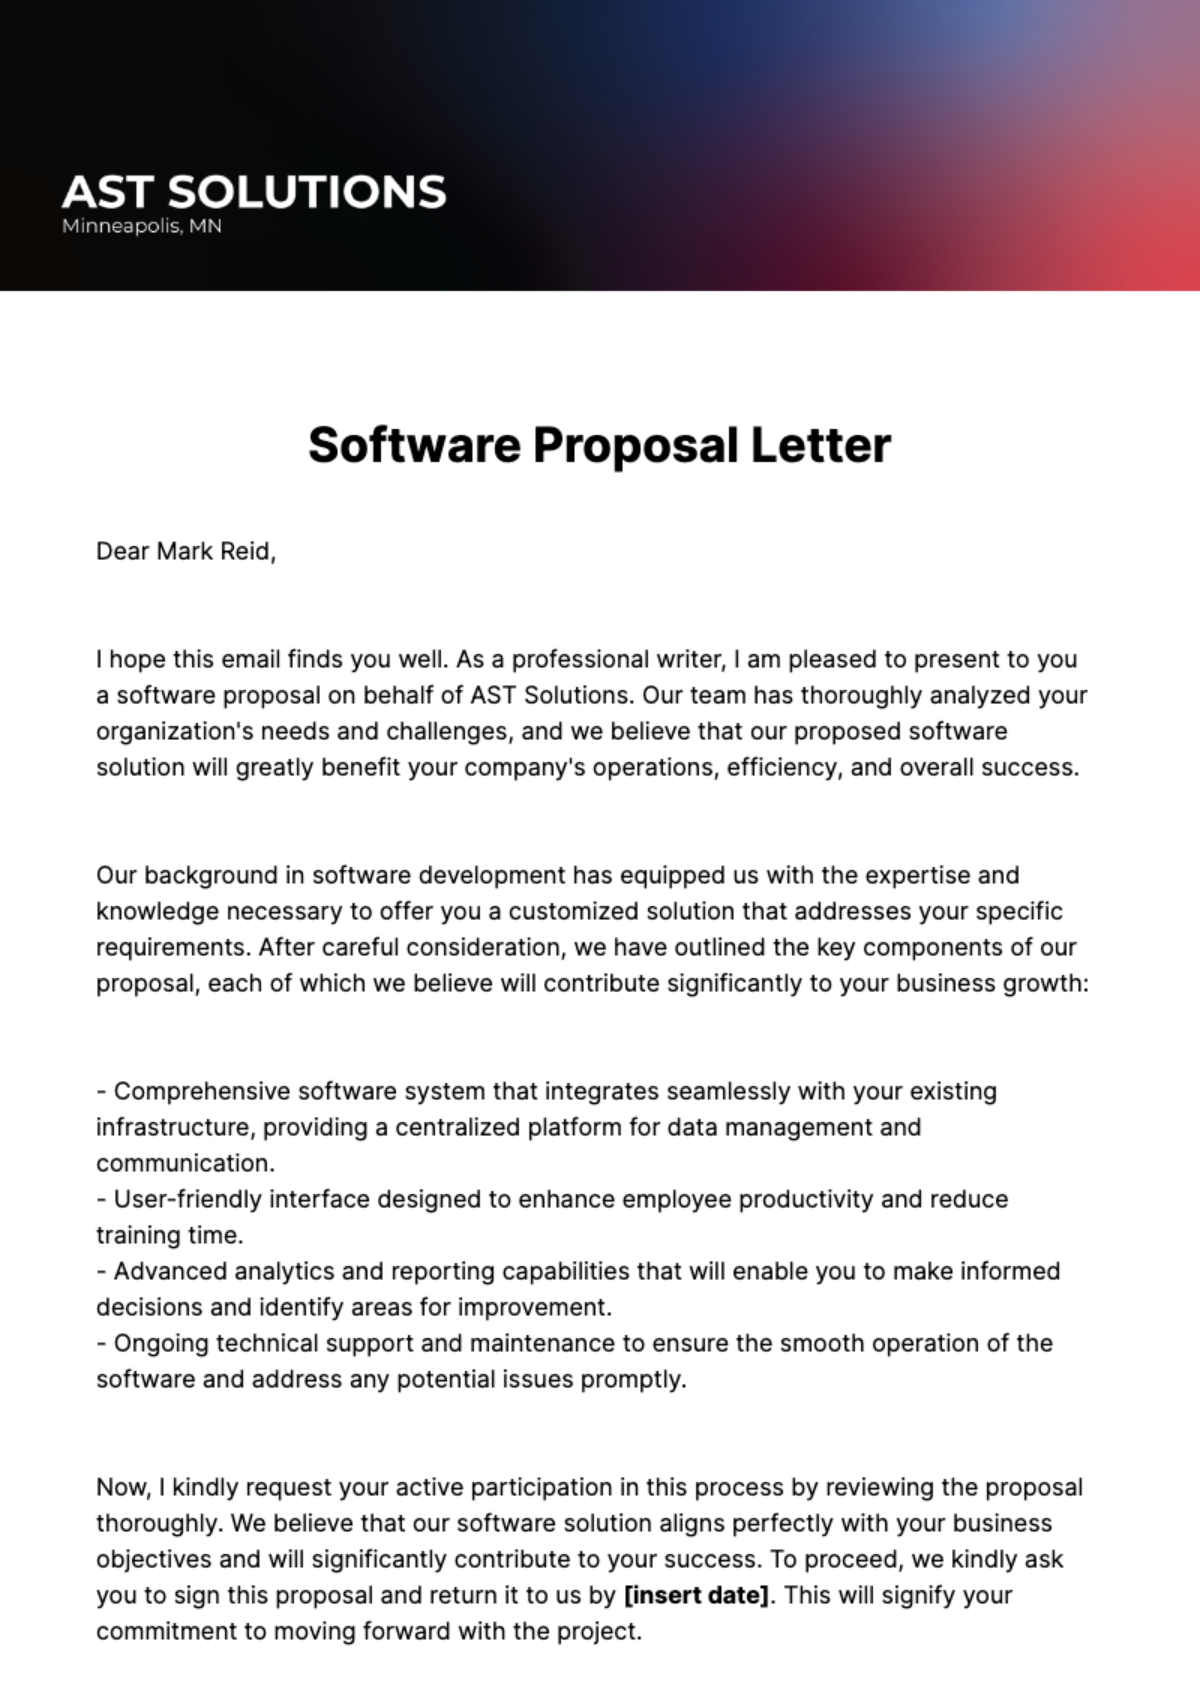 Software Proposal Letter Template